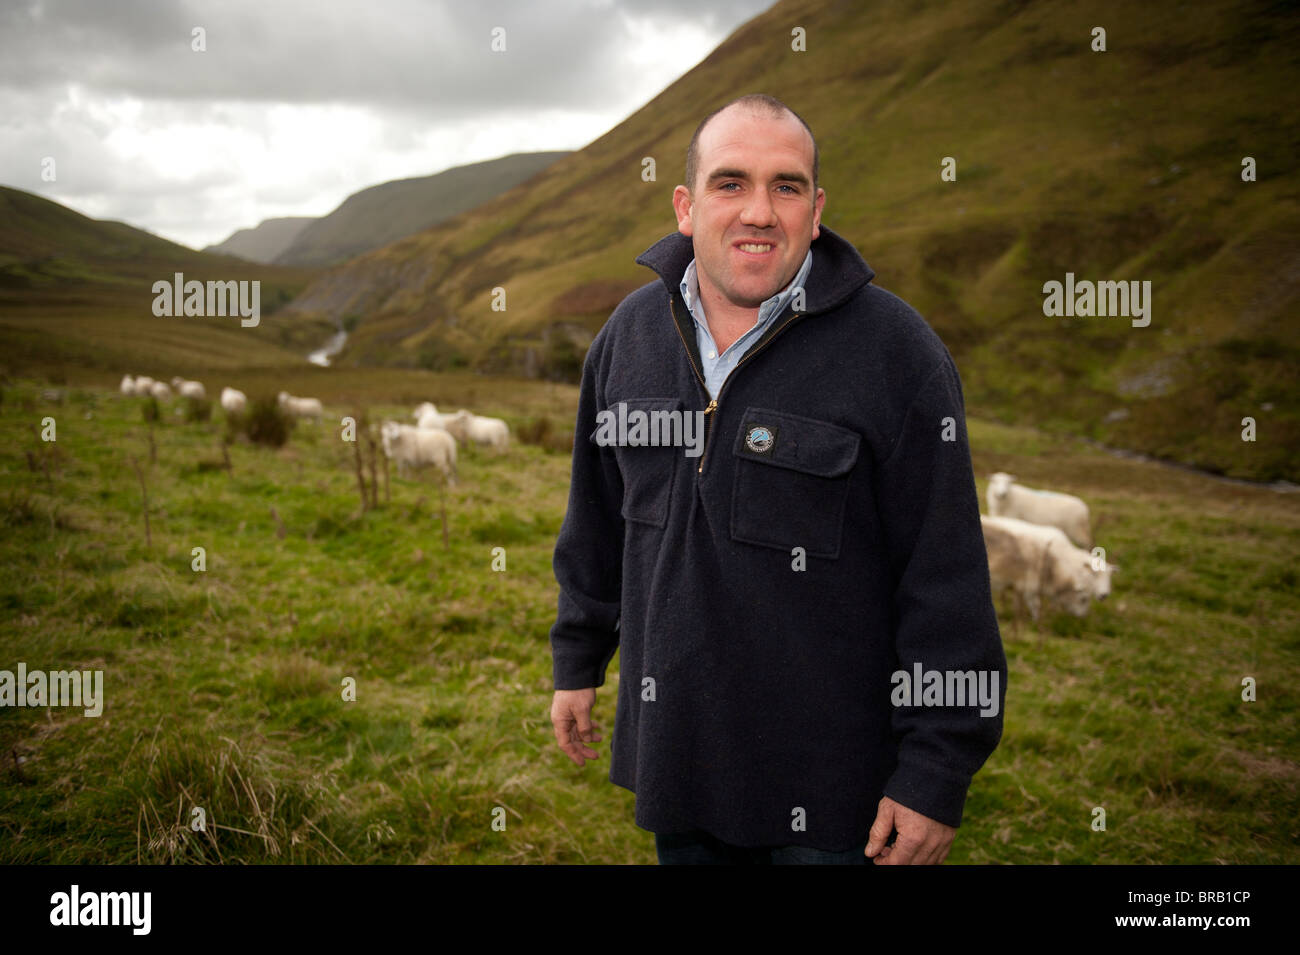 JAMES RAW of the Cambrian Mountain Lamb Producers Co-Operative group, Cwm Ystwyth, Ceredigion Mid Wales UK. Stock Photo